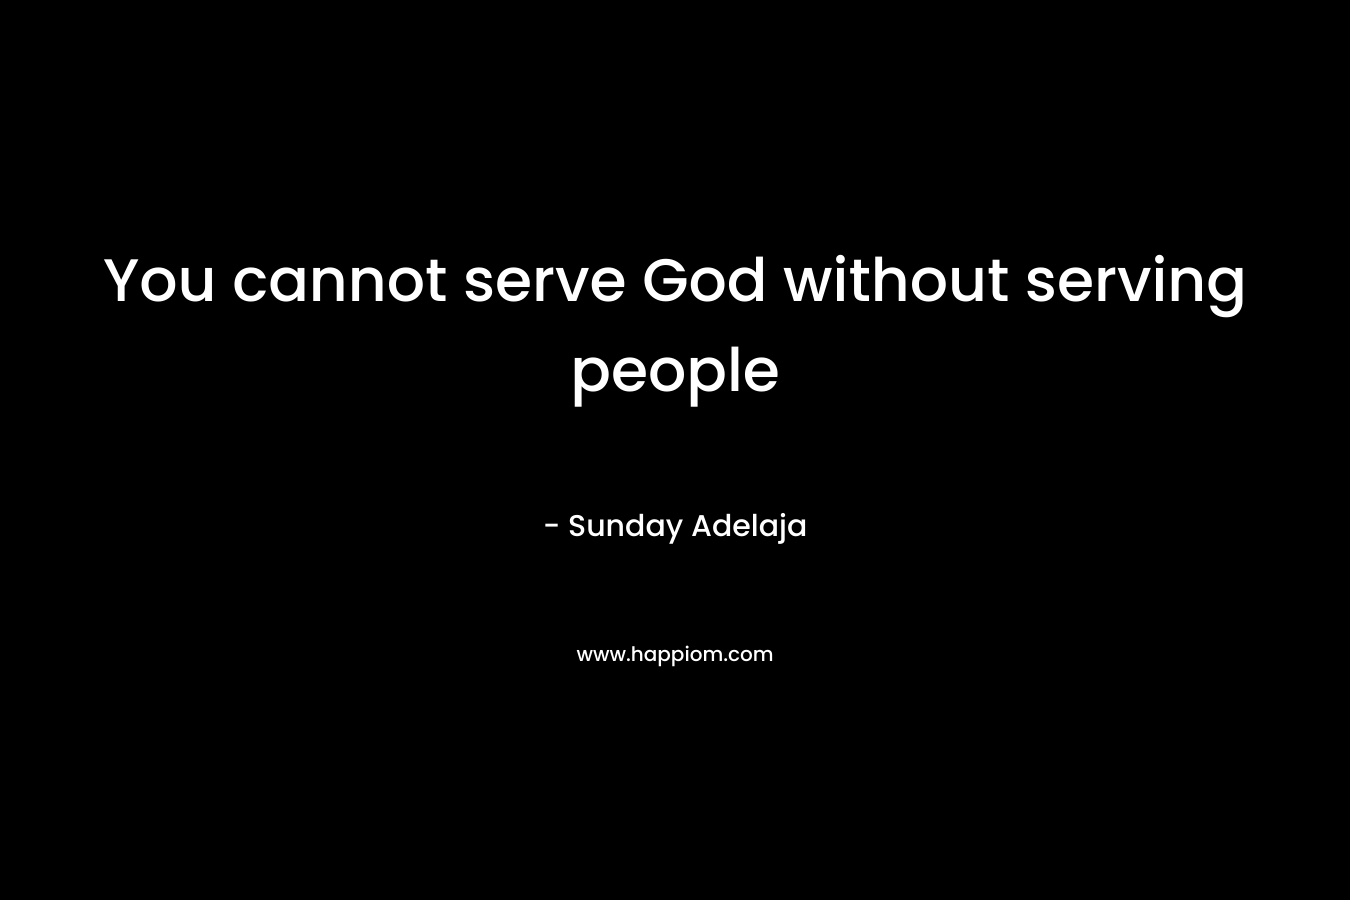 You cannot serve God without serving people